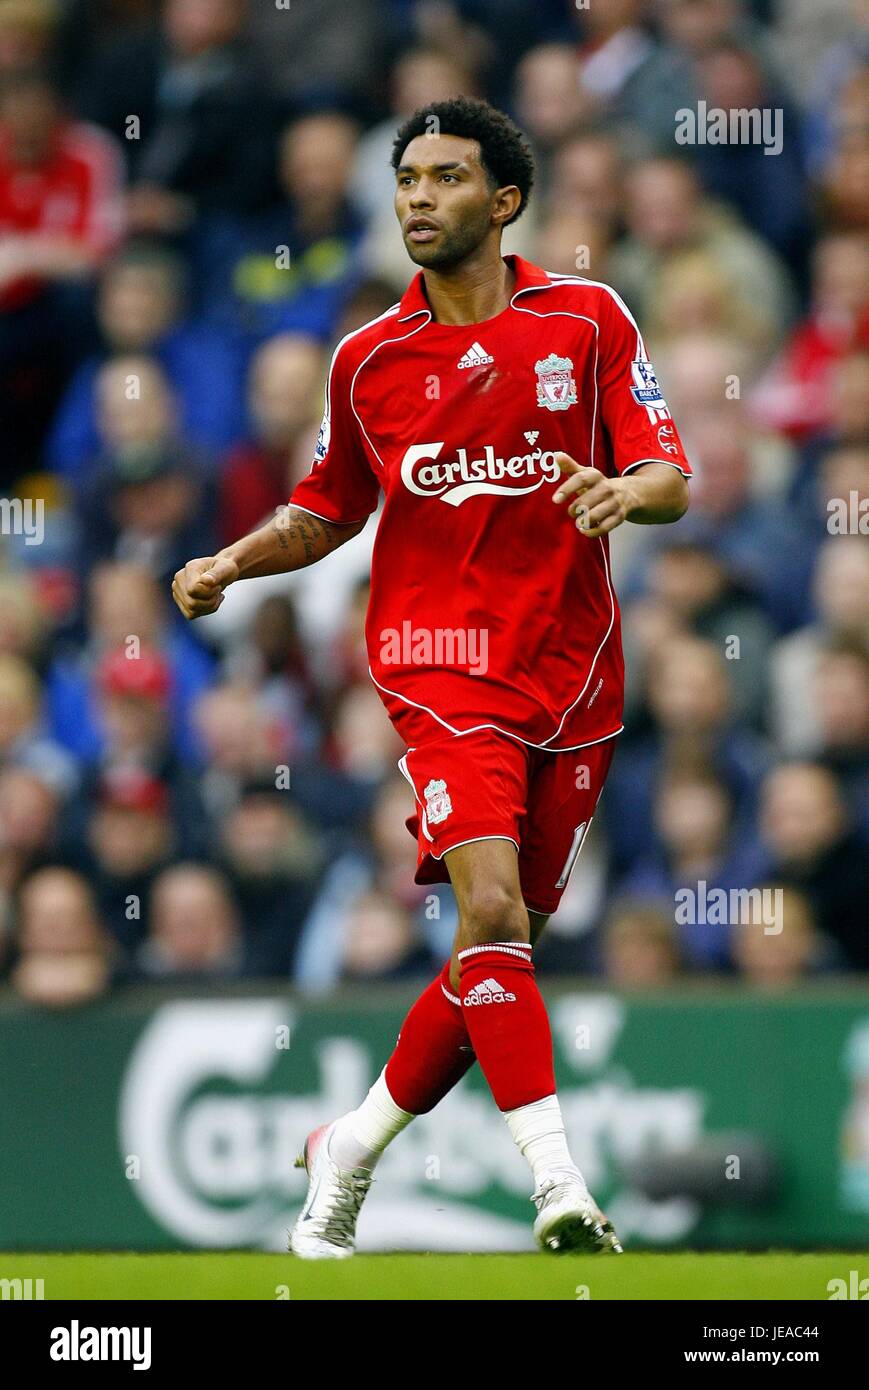 JERMAINE PENNANT Liverpool FC ANFIELD LIVERPOOL ENGLAND 19 Agosto 2007 Foto Stock